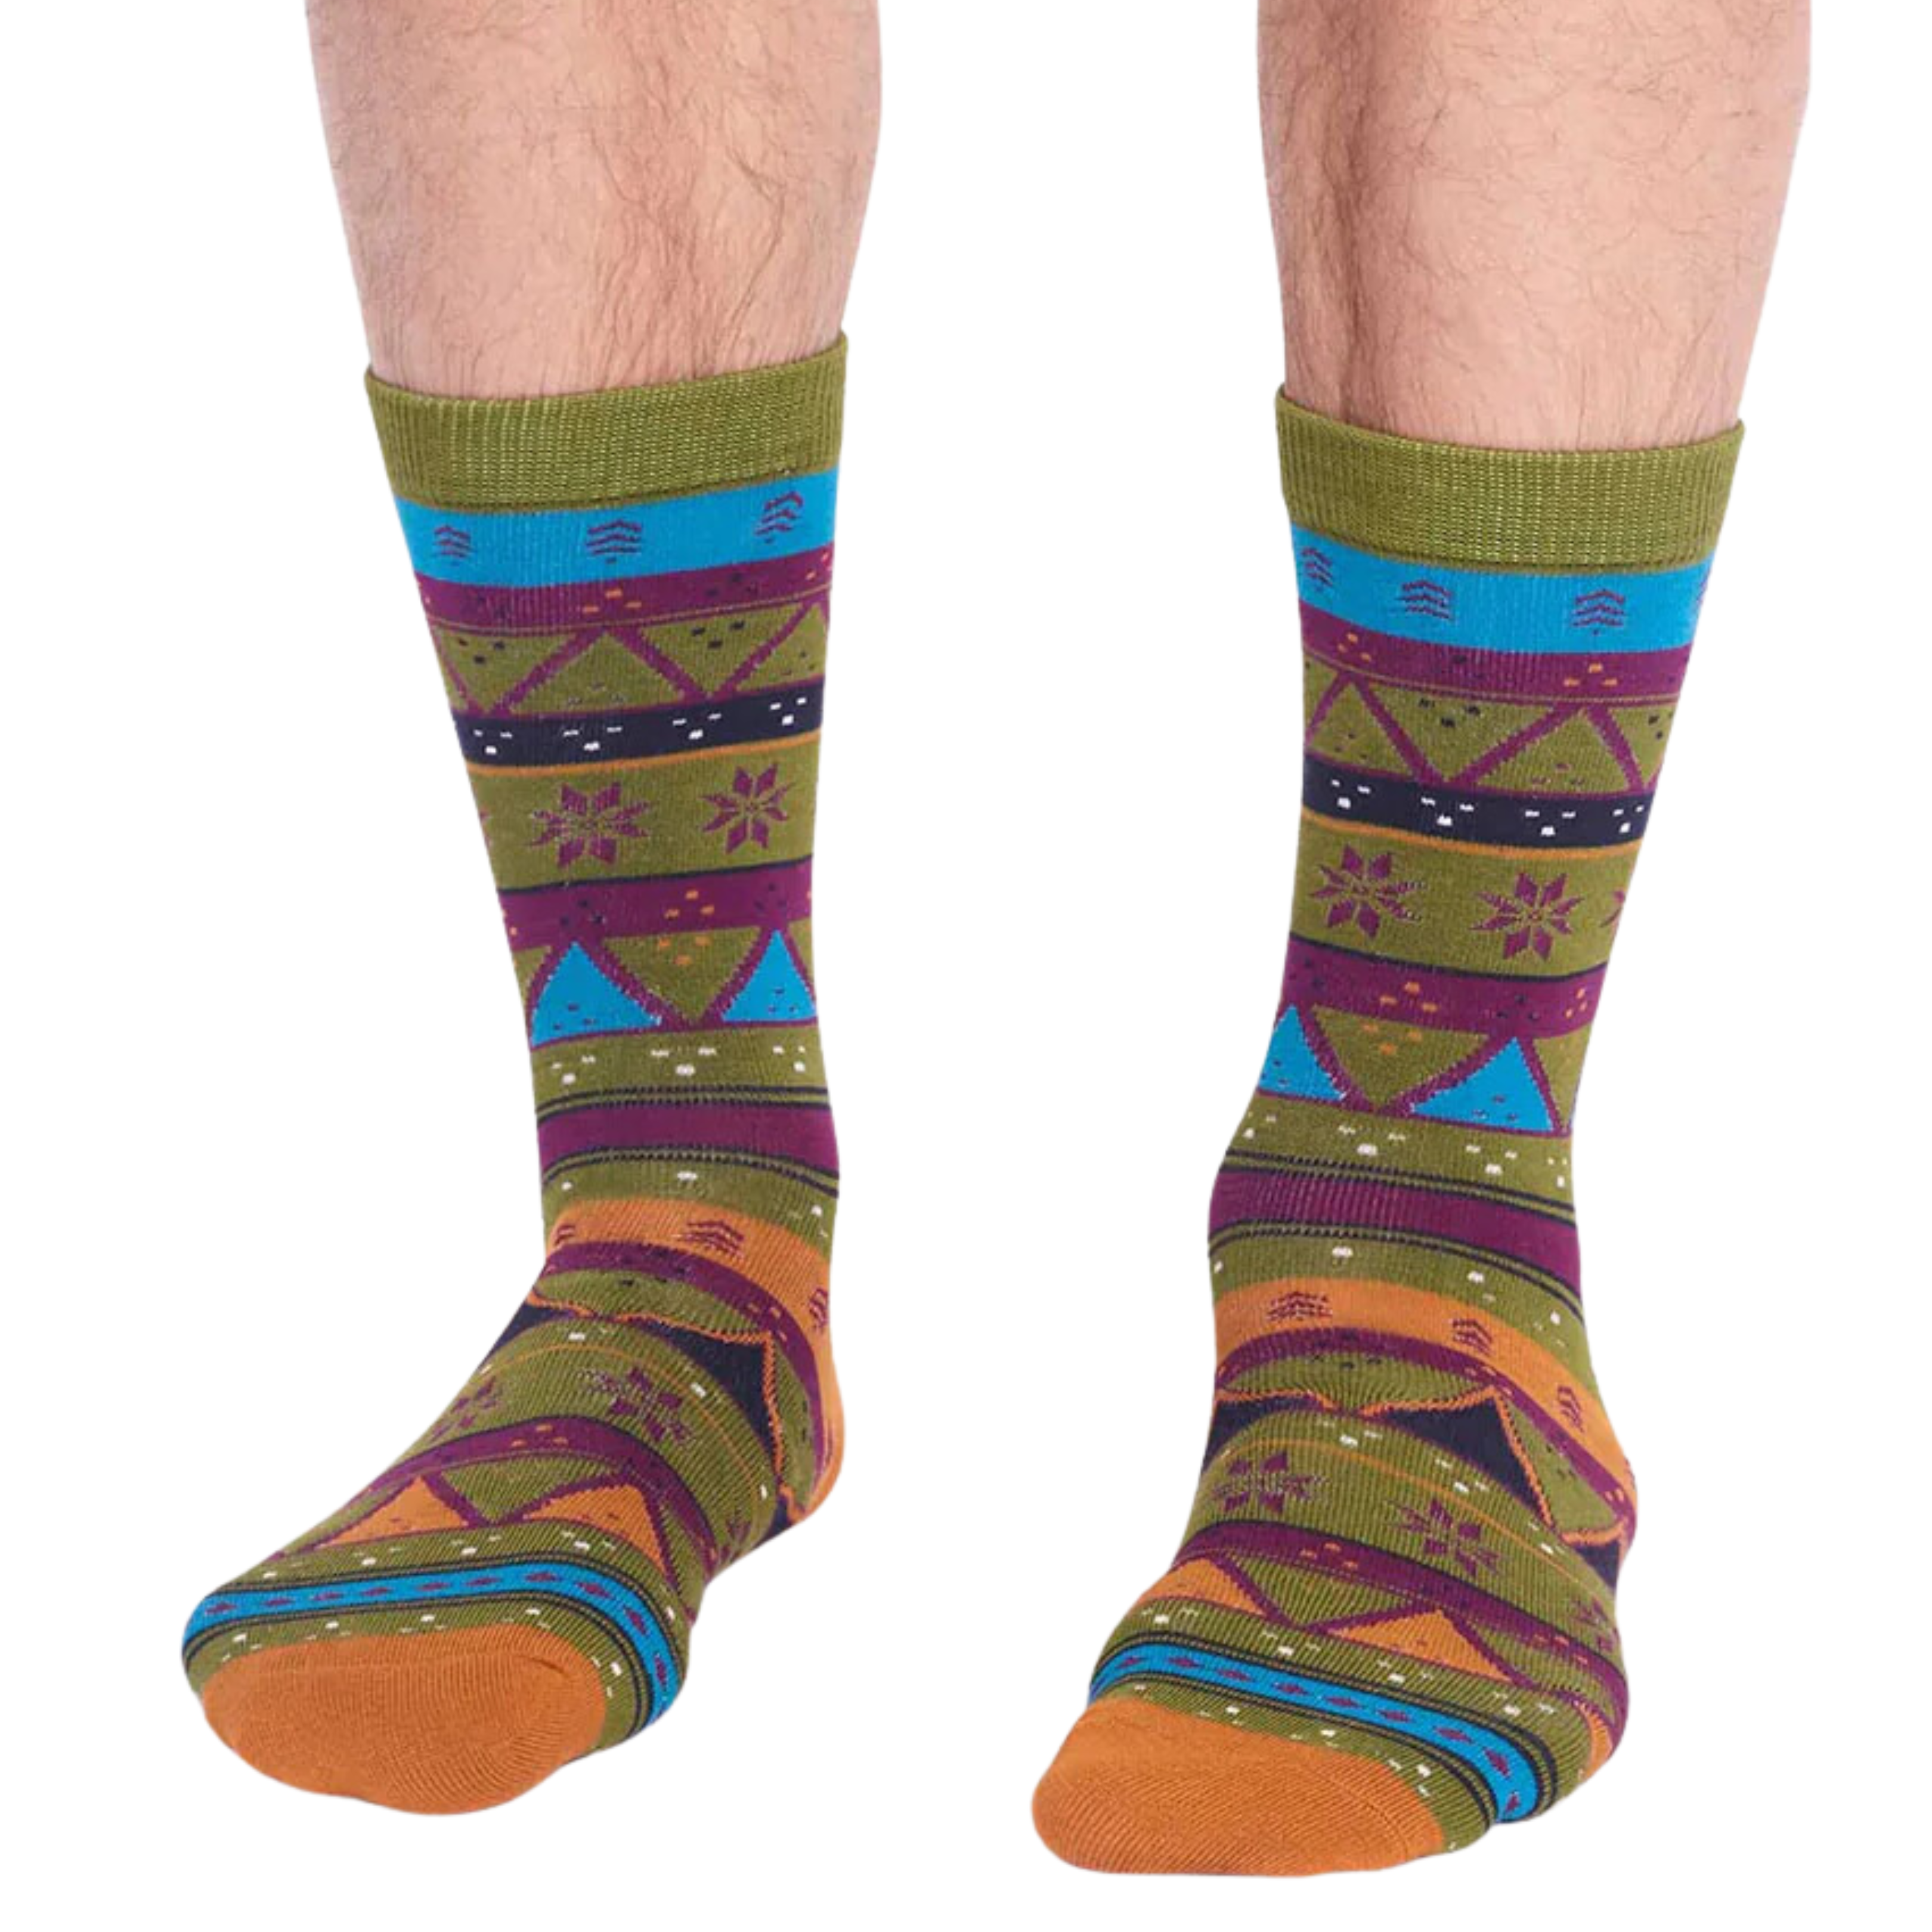 11 Novelty Socks You Can Buy In Toronto If You're All Out Of Holiday Gift  Ideas - Narcity